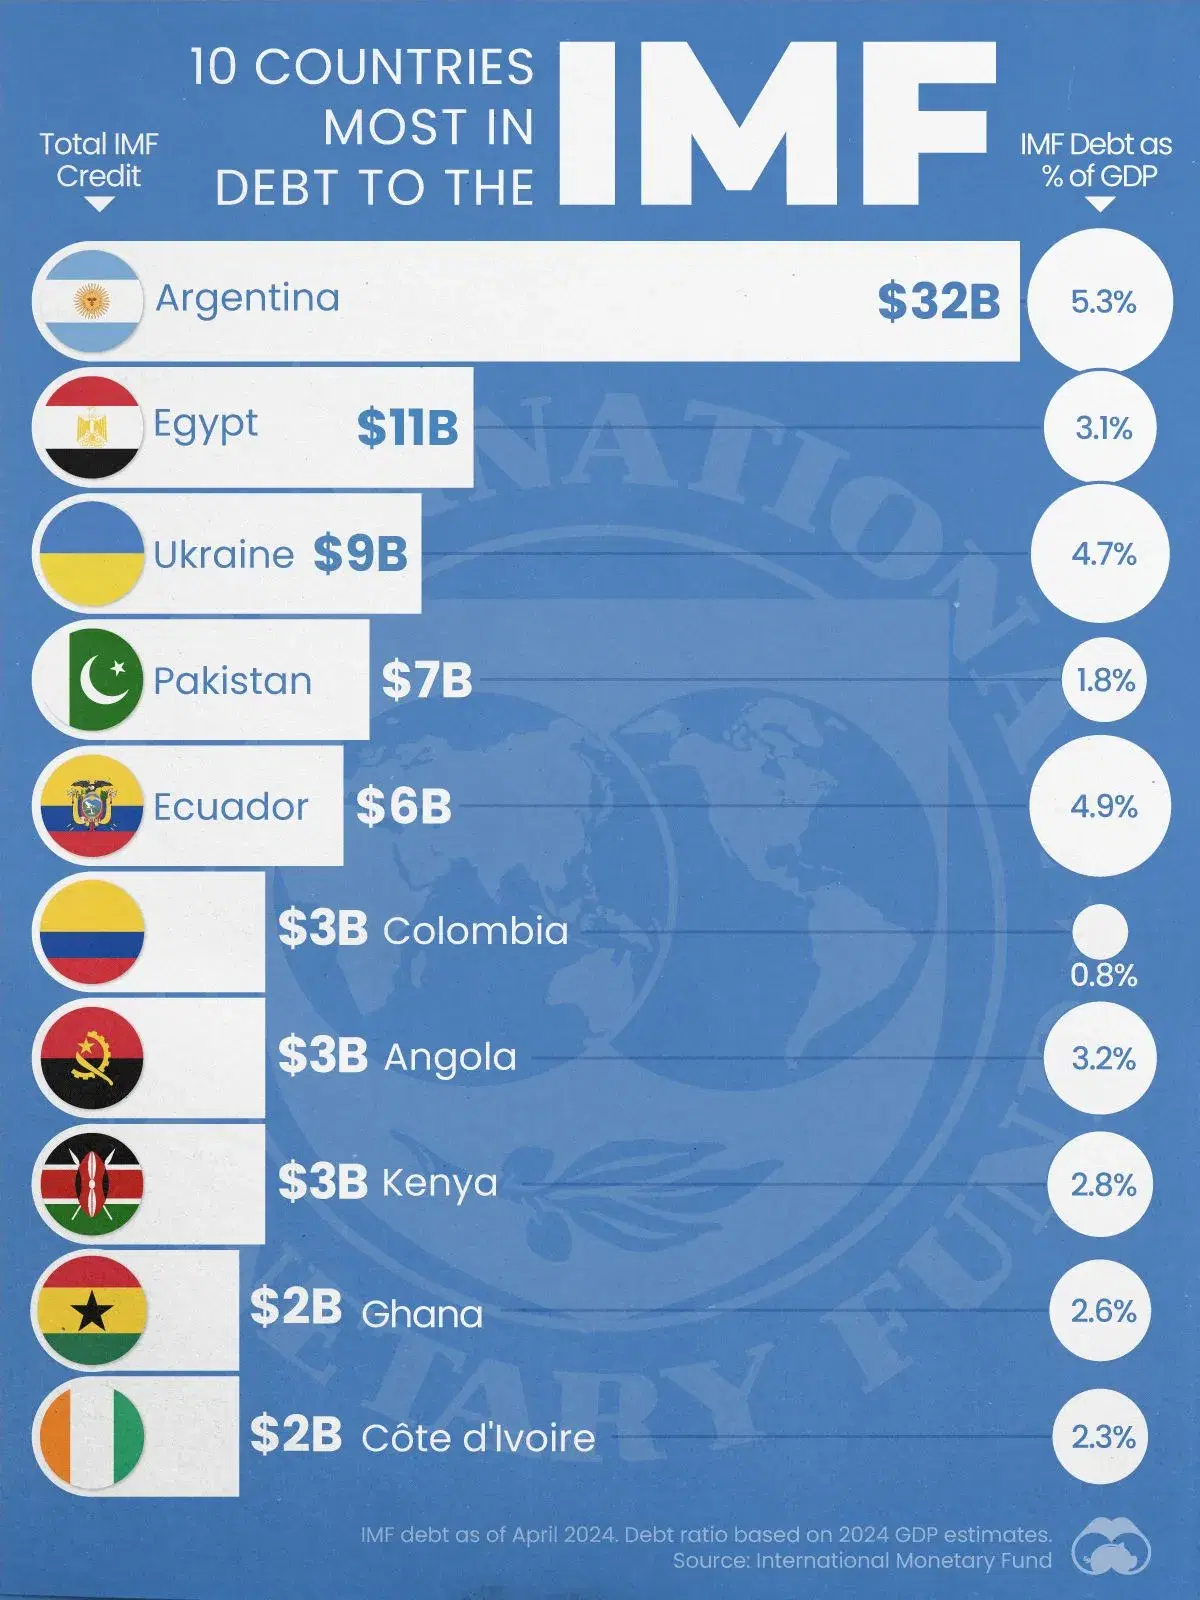 Argentina leads in debt to the IMF, equivalent to 5% of GDP